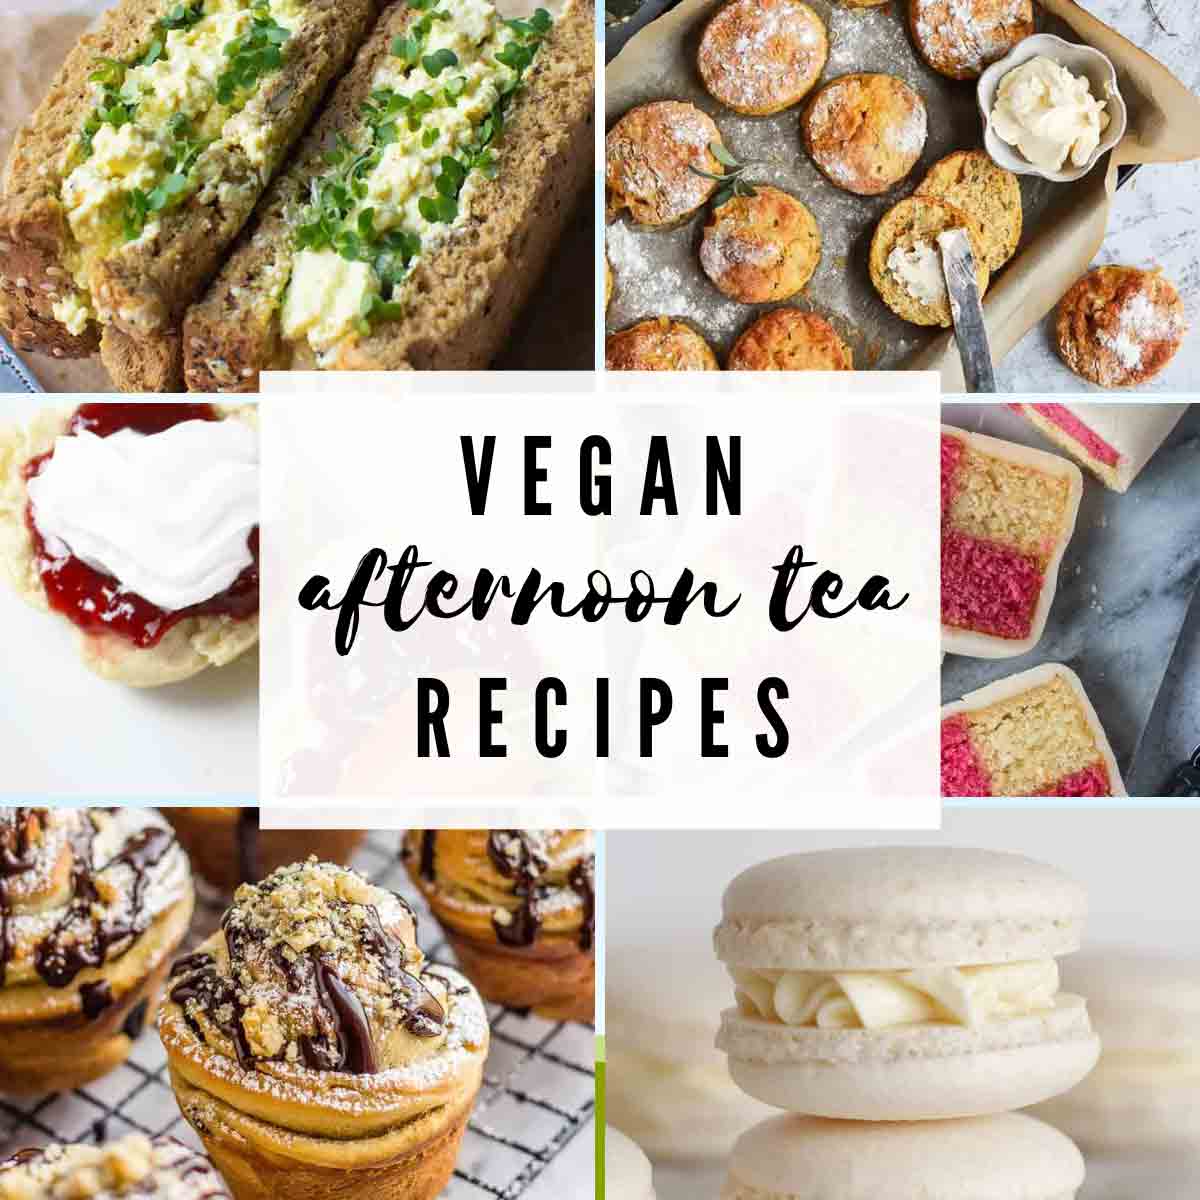 Food Images With Text Overlay That Reads 'vegan Afternoon Tea Recipes'